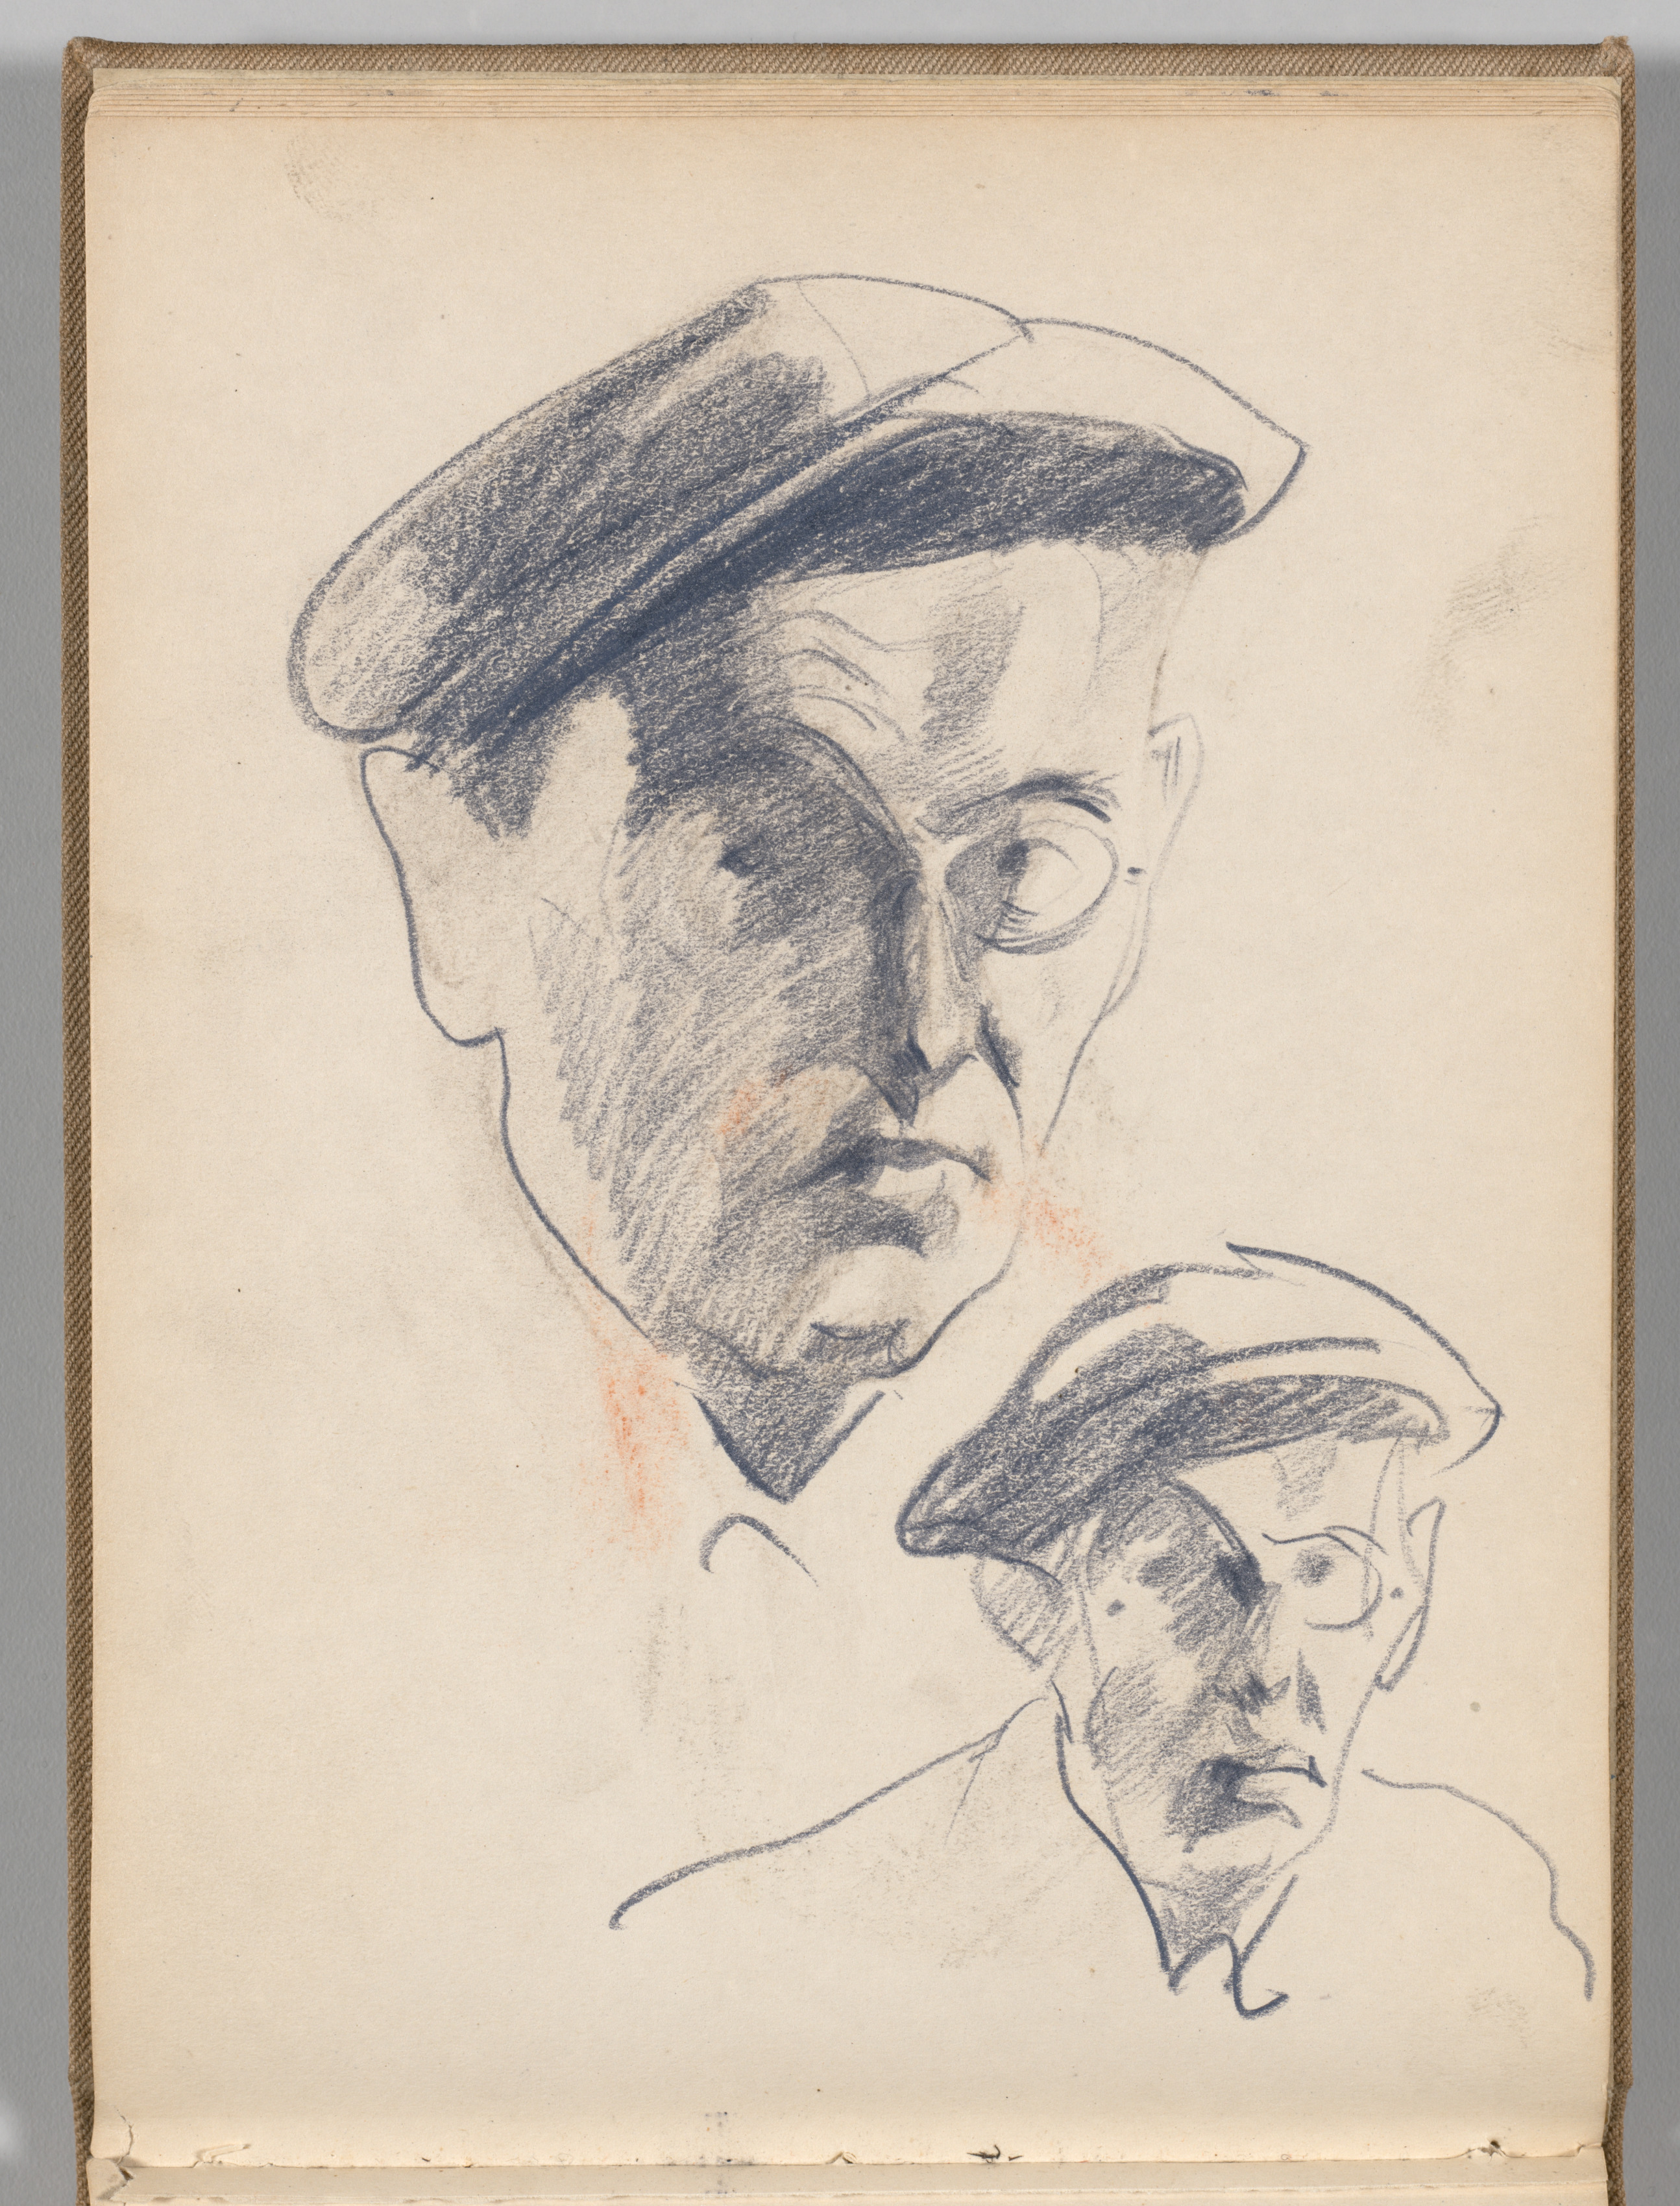 Sketchbook, Spain: Page 16, Studies of a Man's Head with a Cap